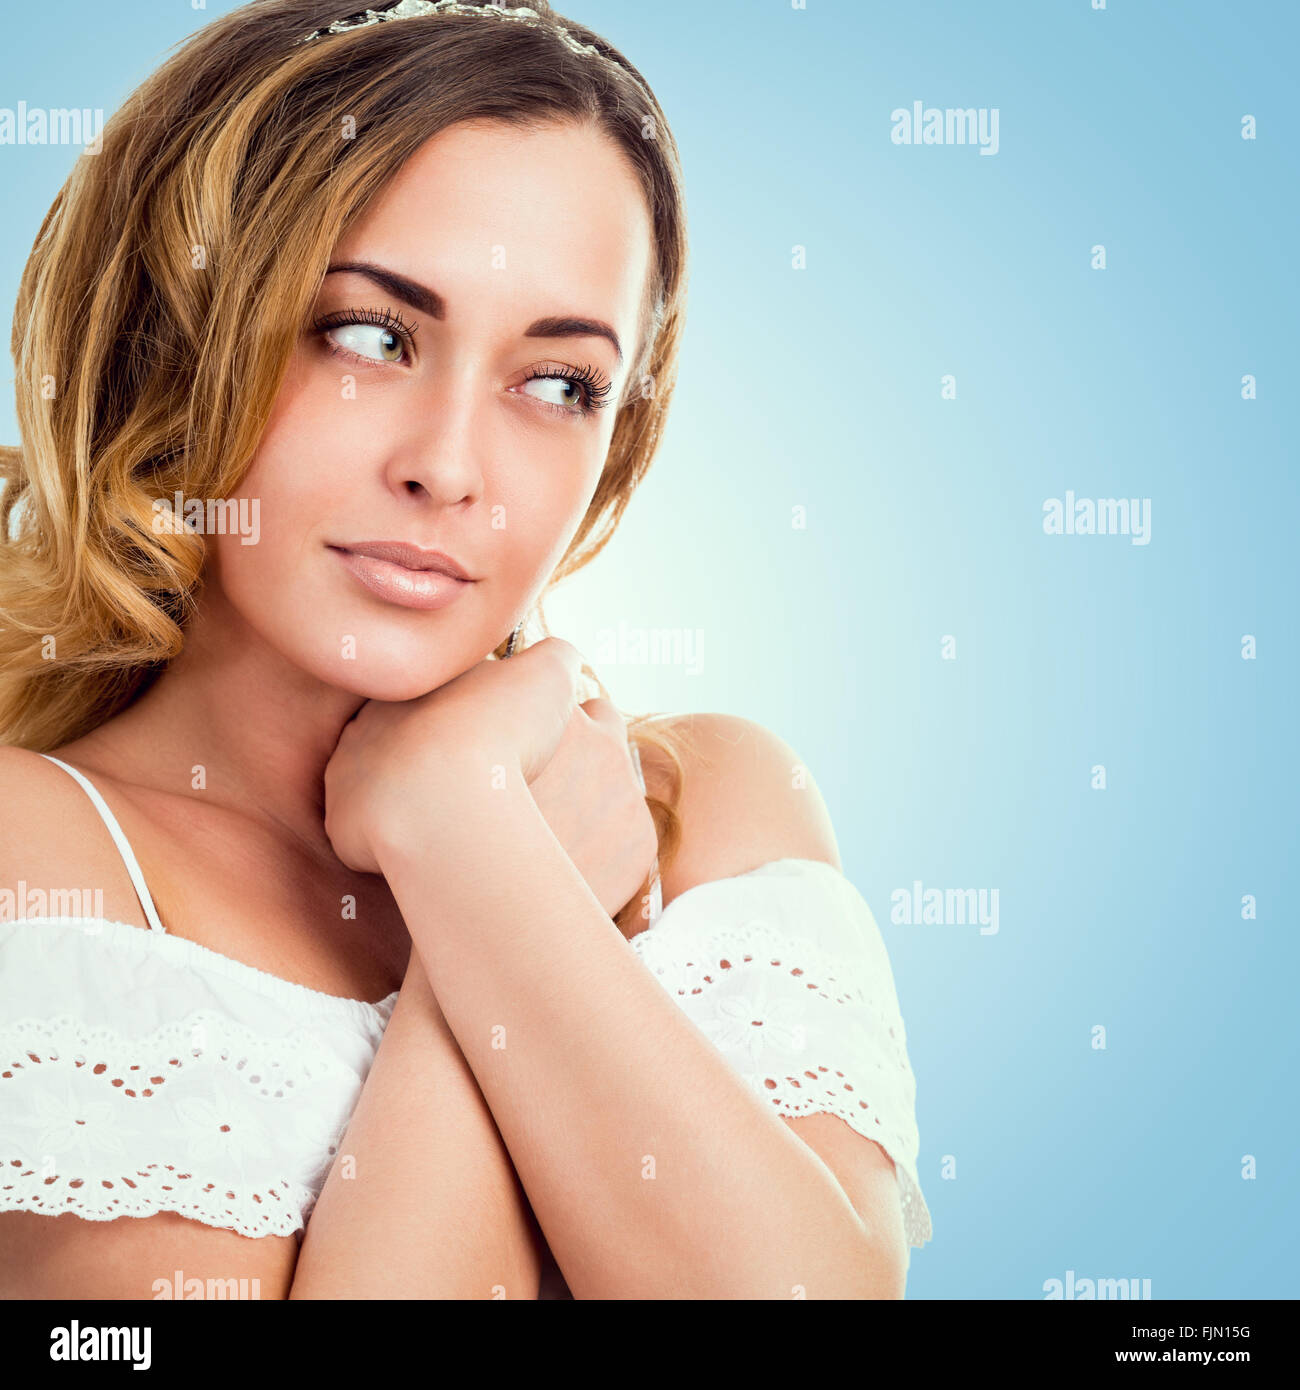 Portrait of a beautiful young woman on a blue background Stock Photo